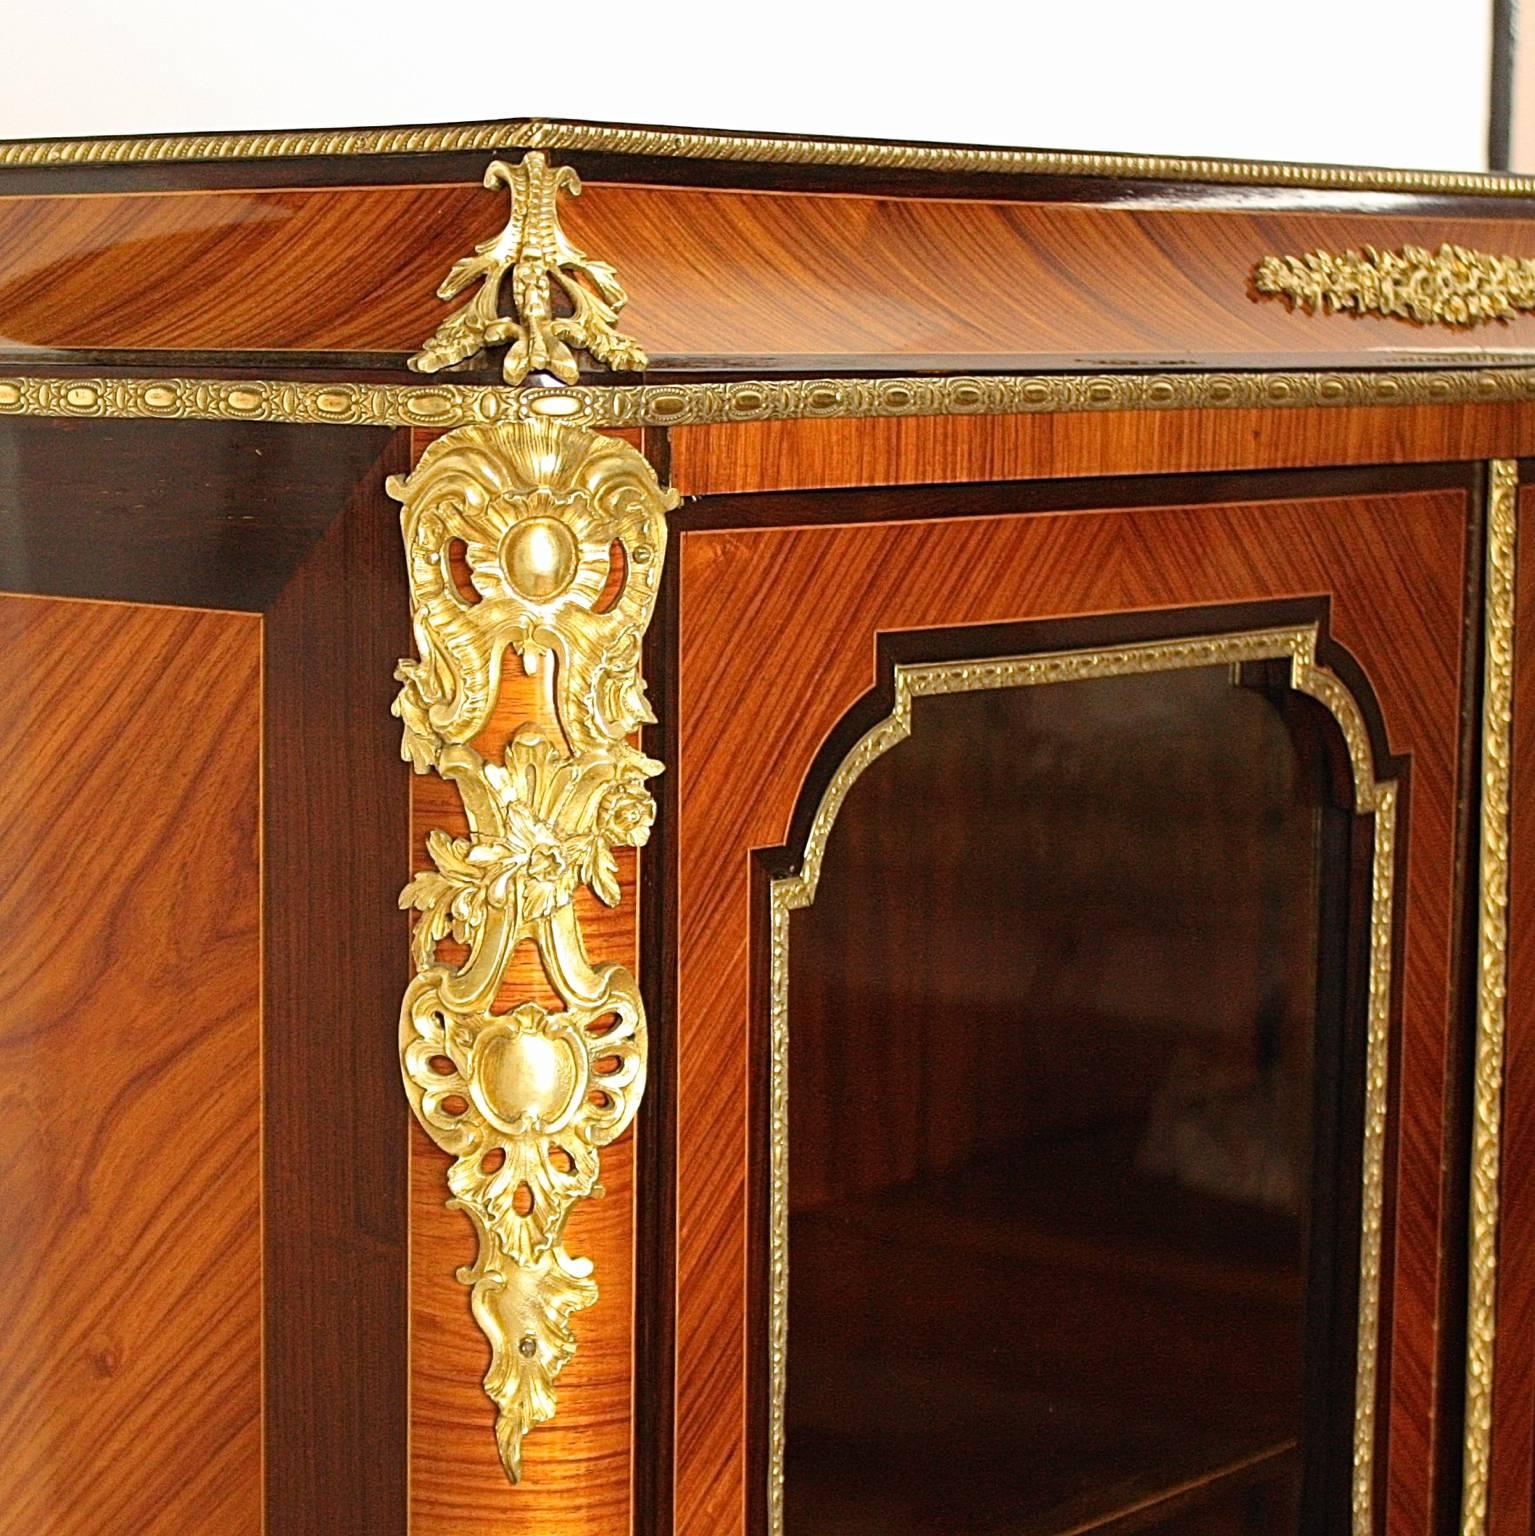 French 19th Century Vitrine or Bibiotheque in the Louis XV/XVI Transitionale Style